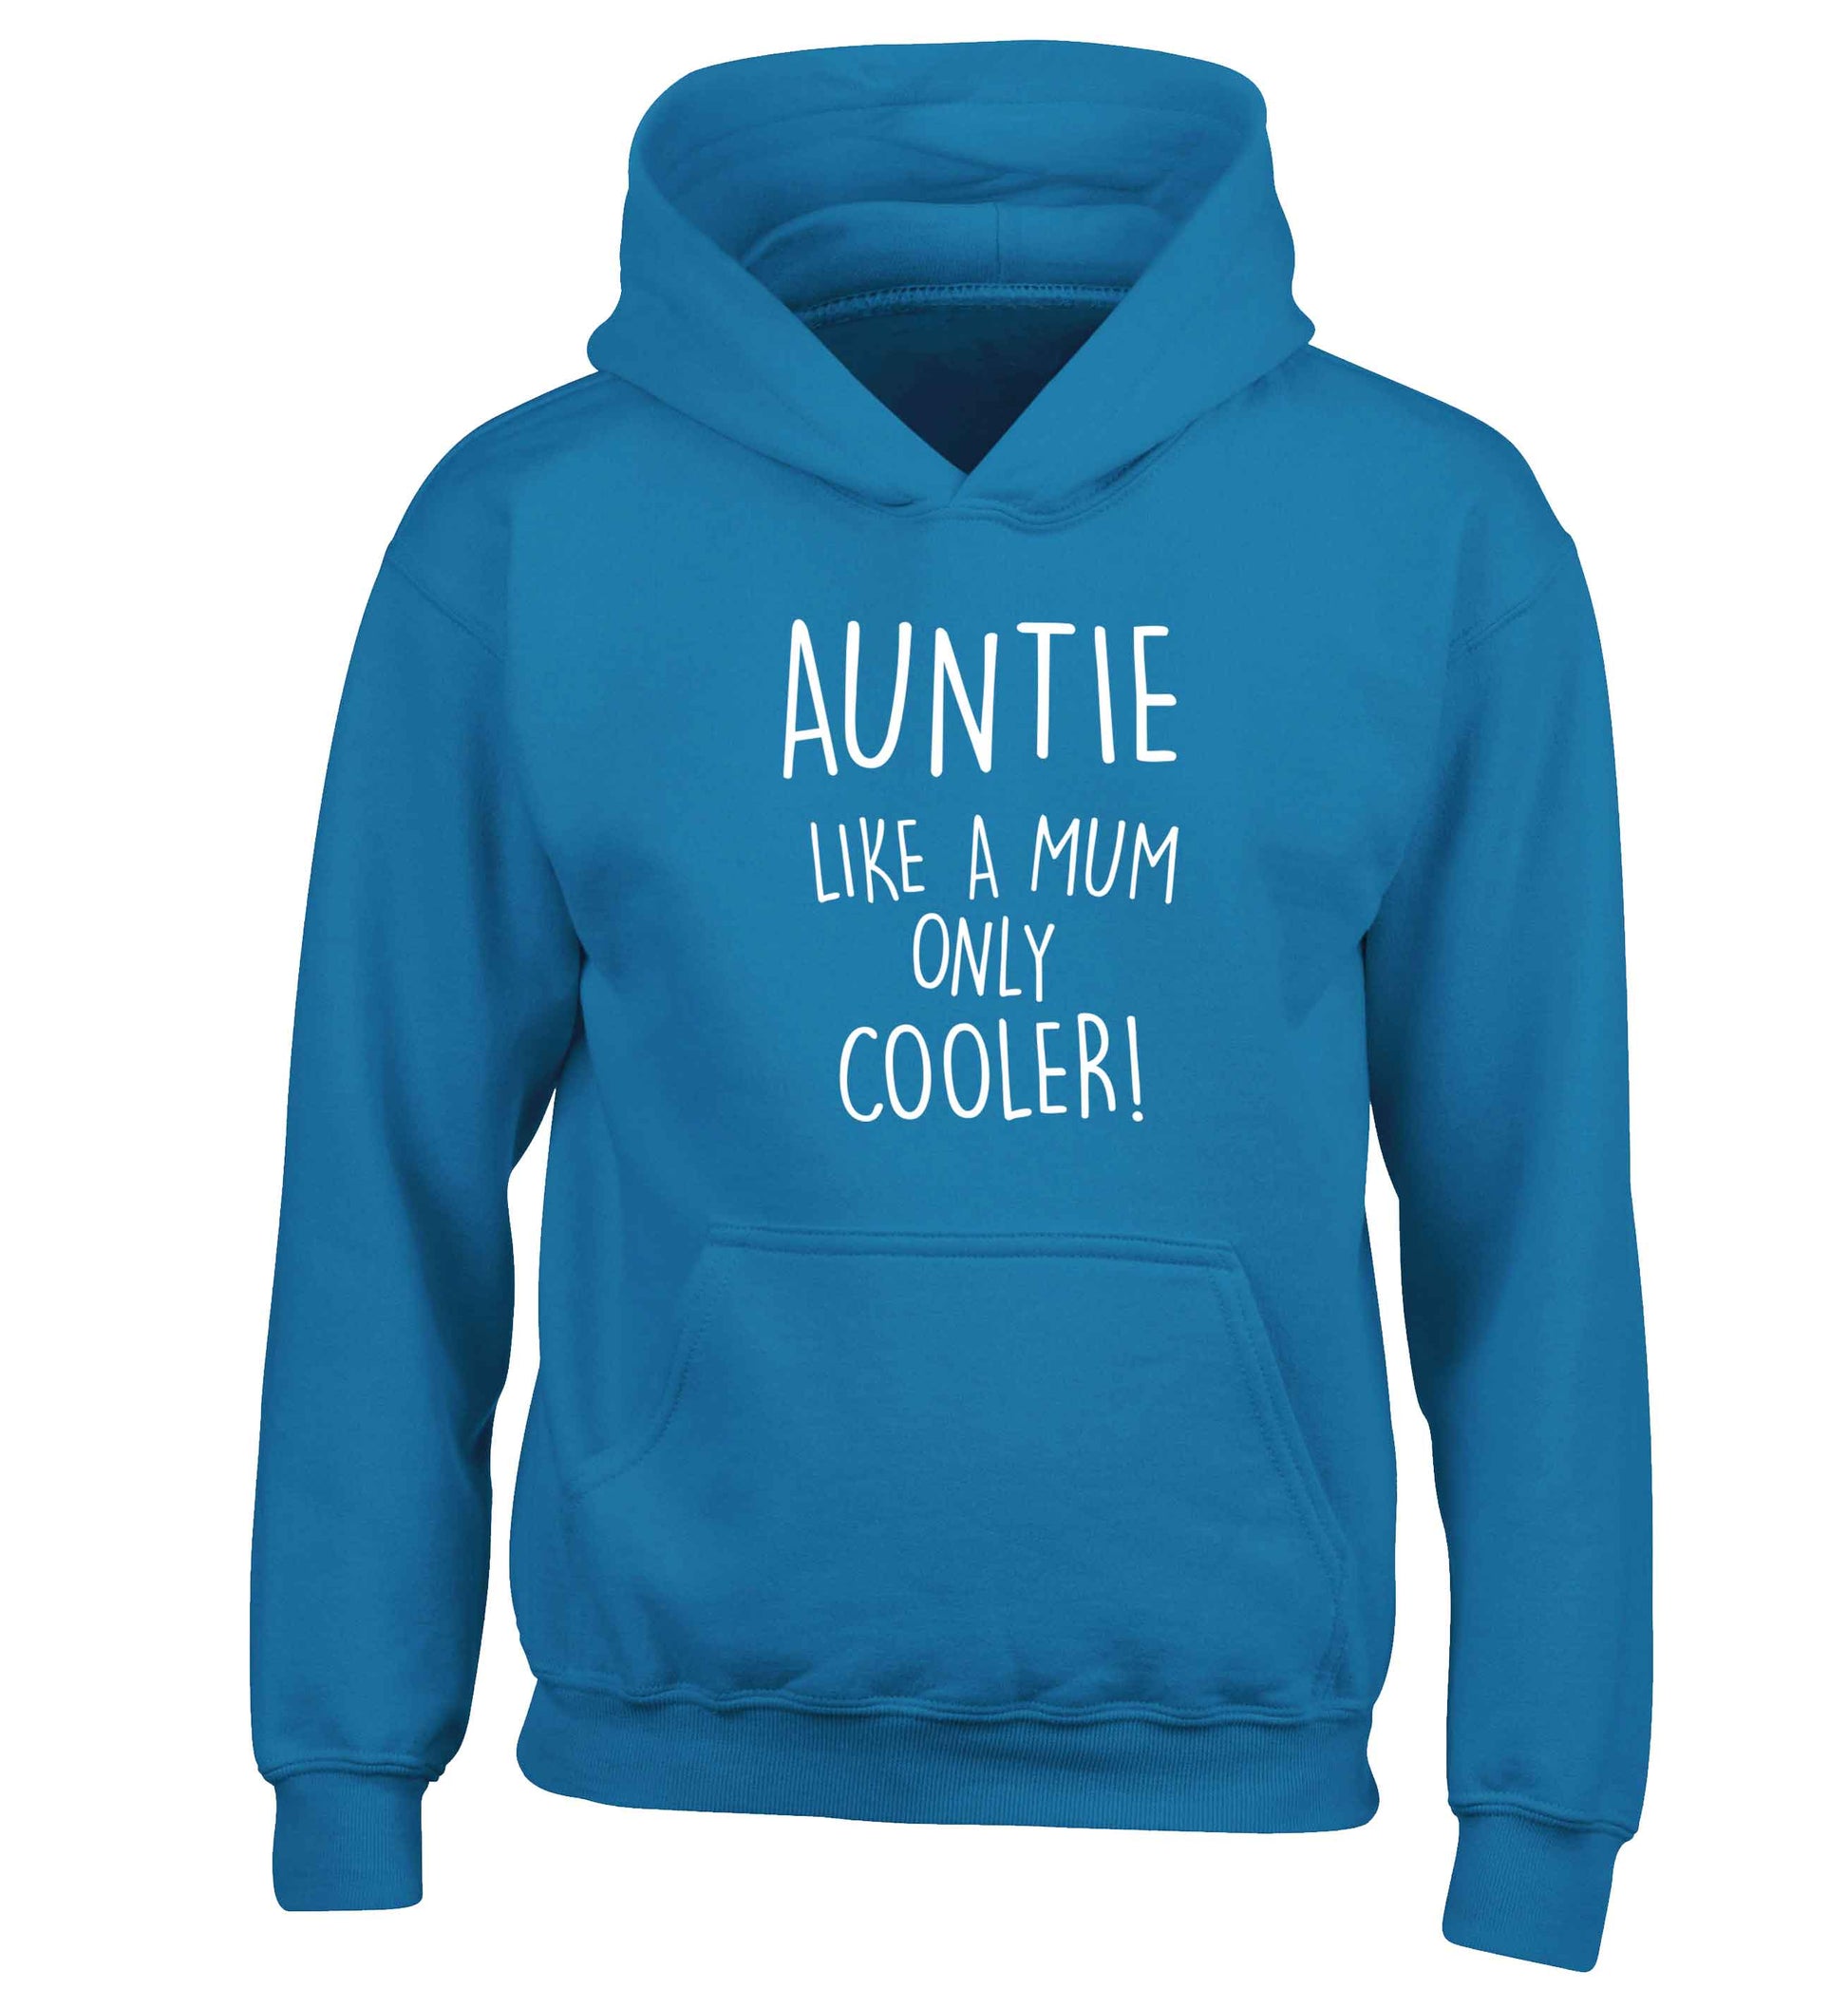 Auntie like a mum only cooler children's blue hoodie 12-13 Years